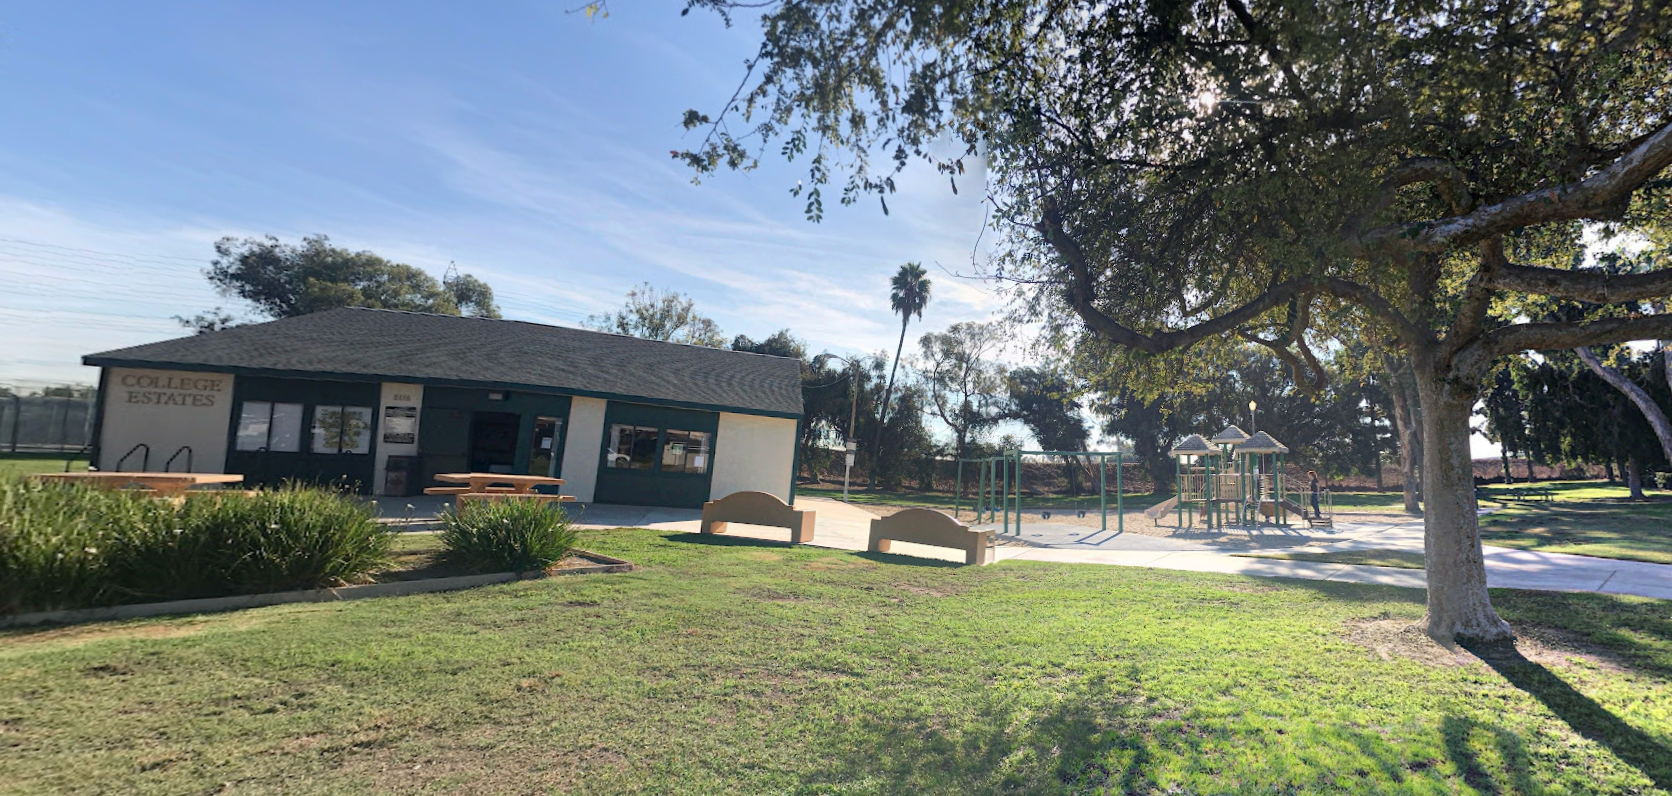 A view of a park in College Estates, Long Beach, California. The College Estates neighbourhood has banned short-term, unsupervised rentals